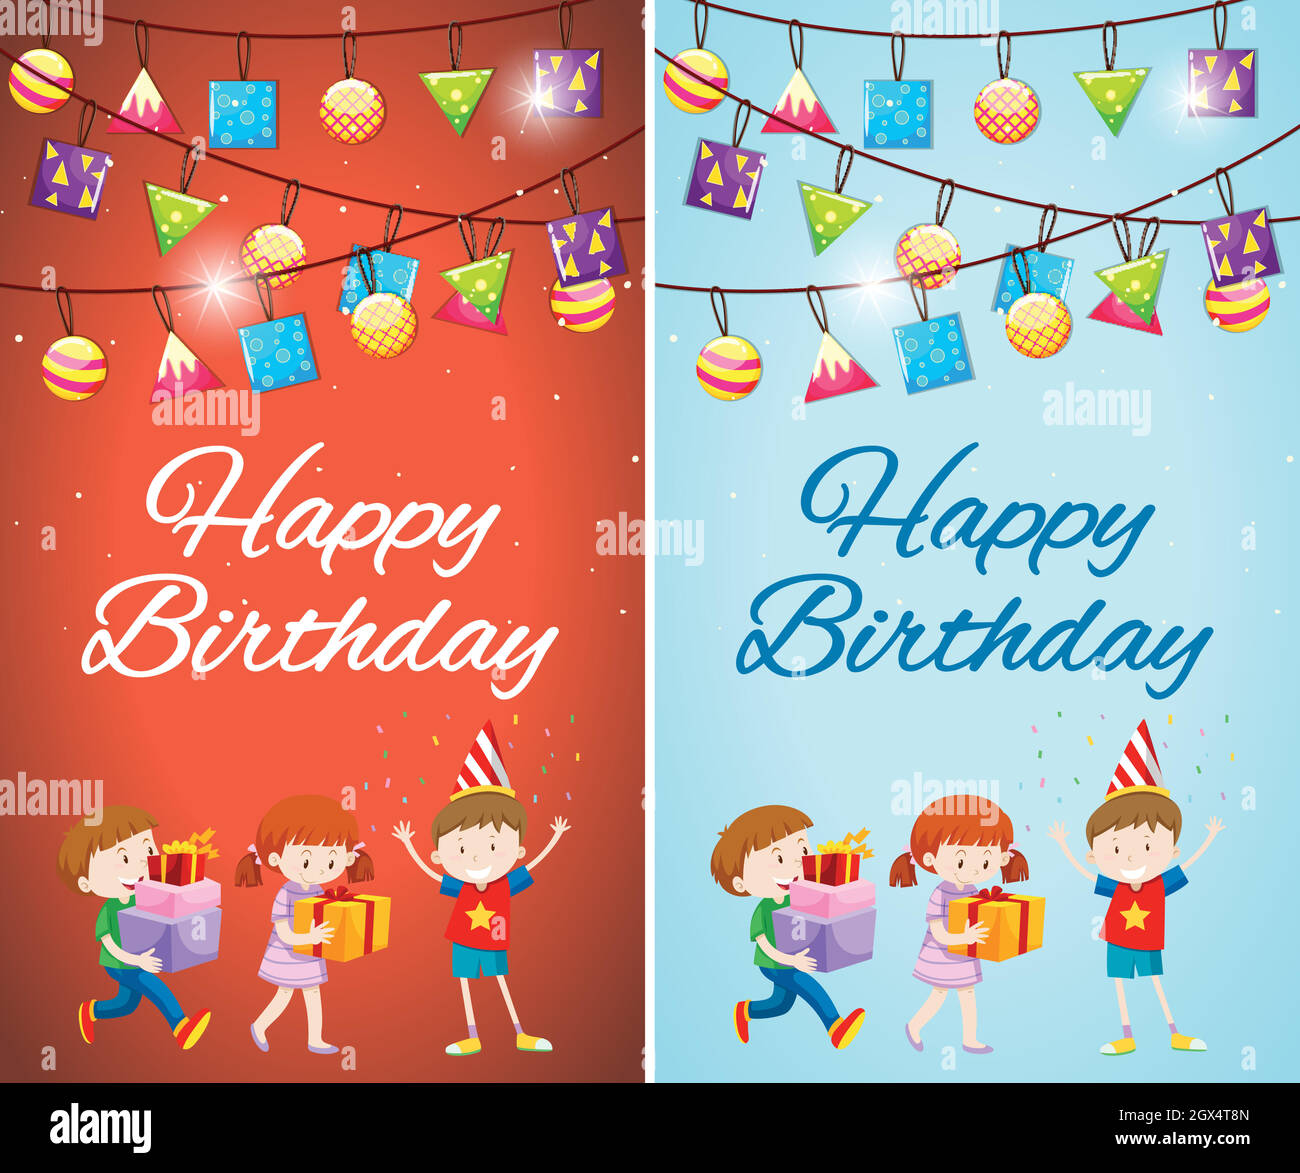 Two designs of birthday card template with kids and presents Stock Vector